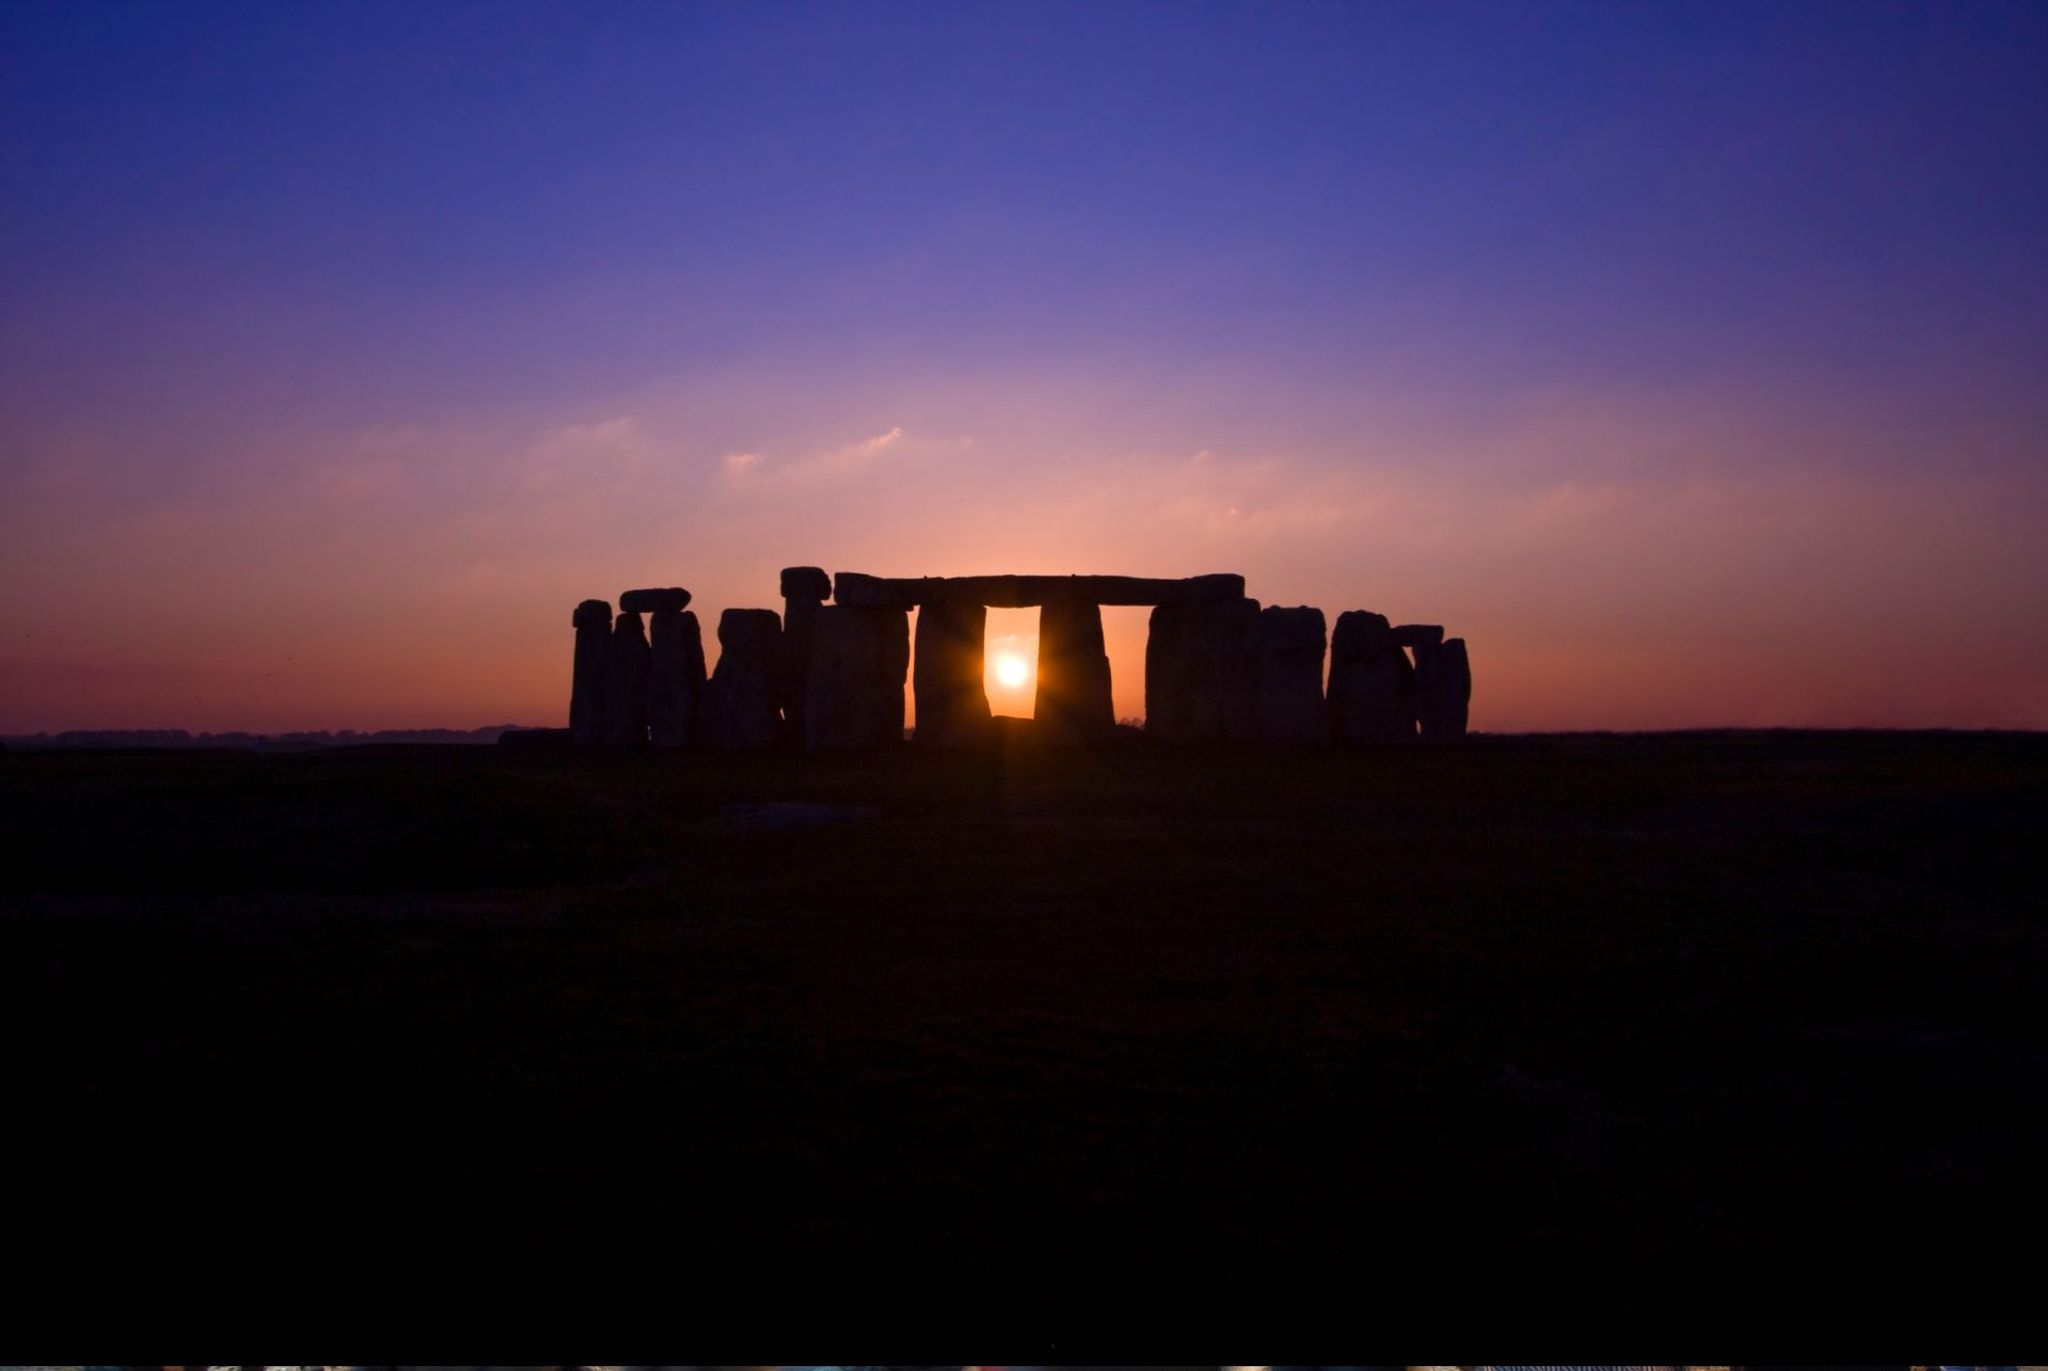 Why do people visit Stonehenge on the Summer Solstice day?